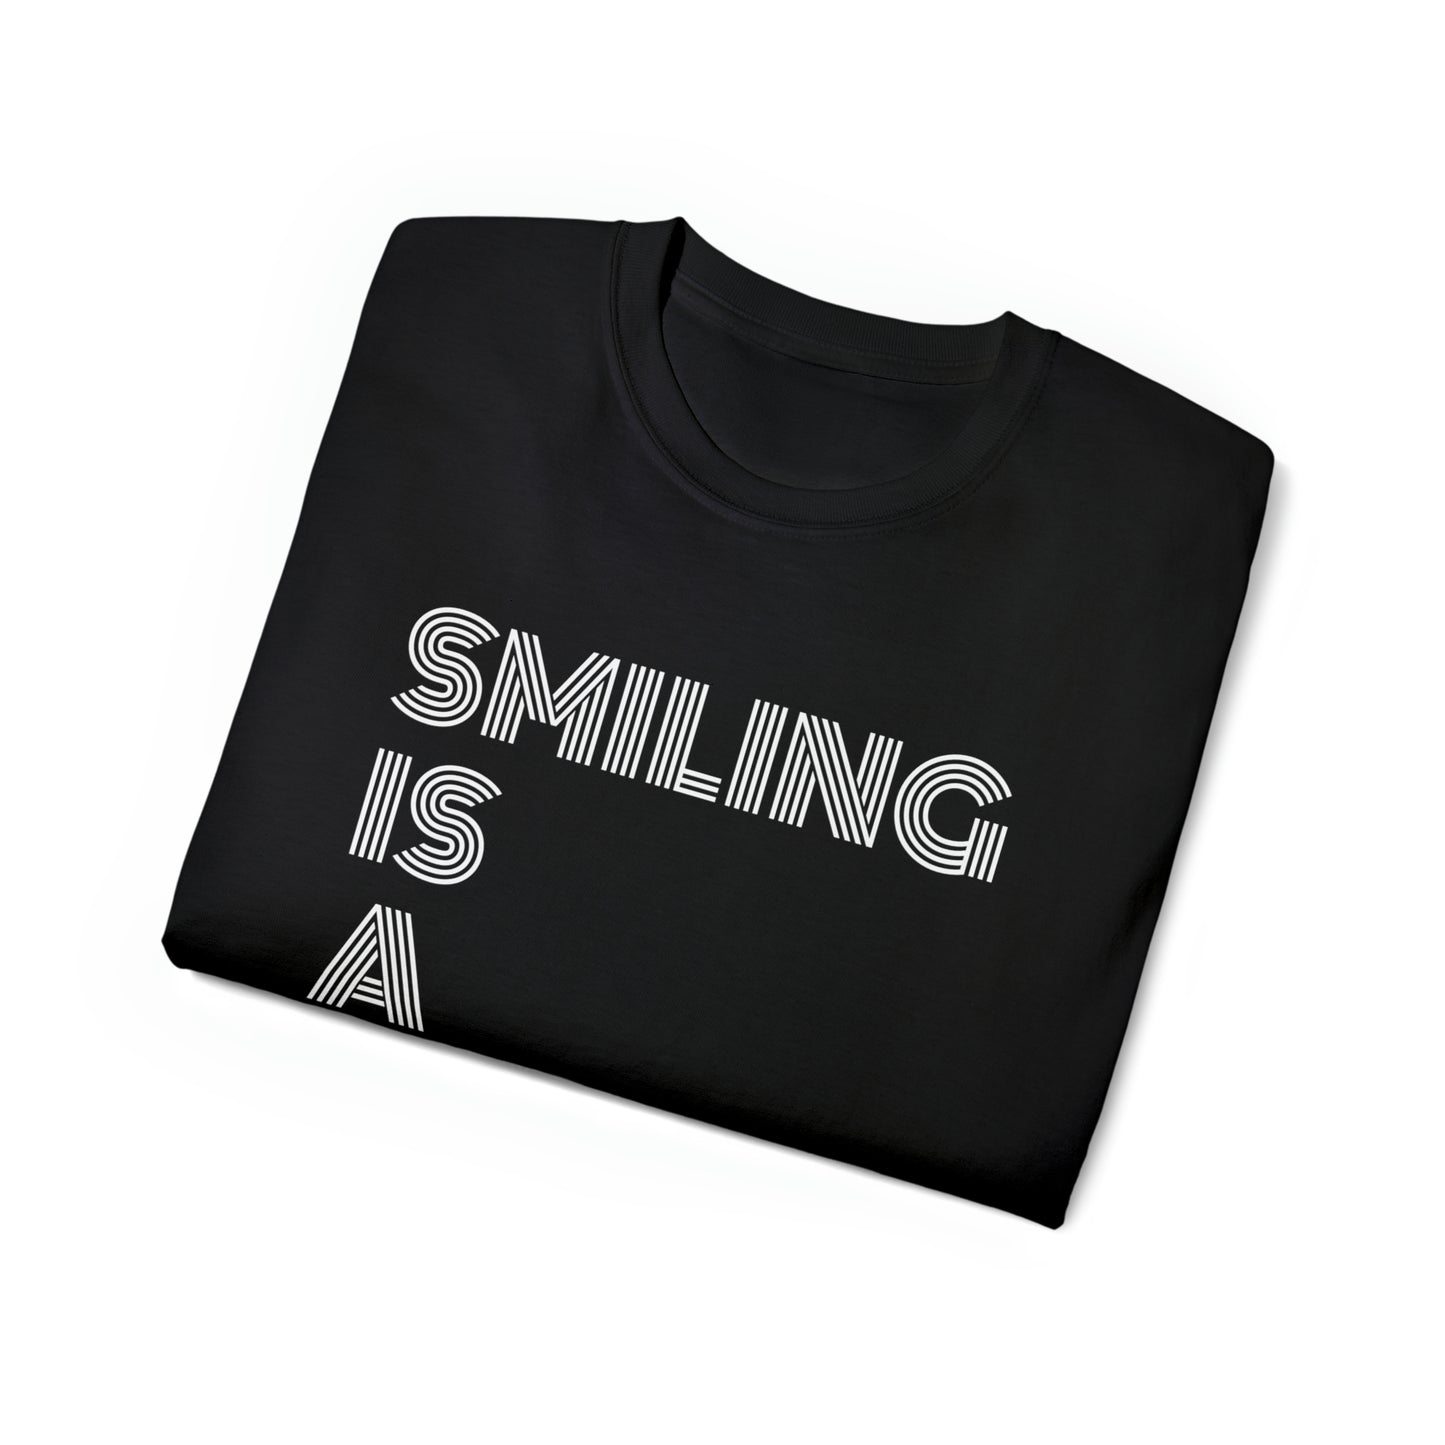 Smiling is a crime T-Shirt